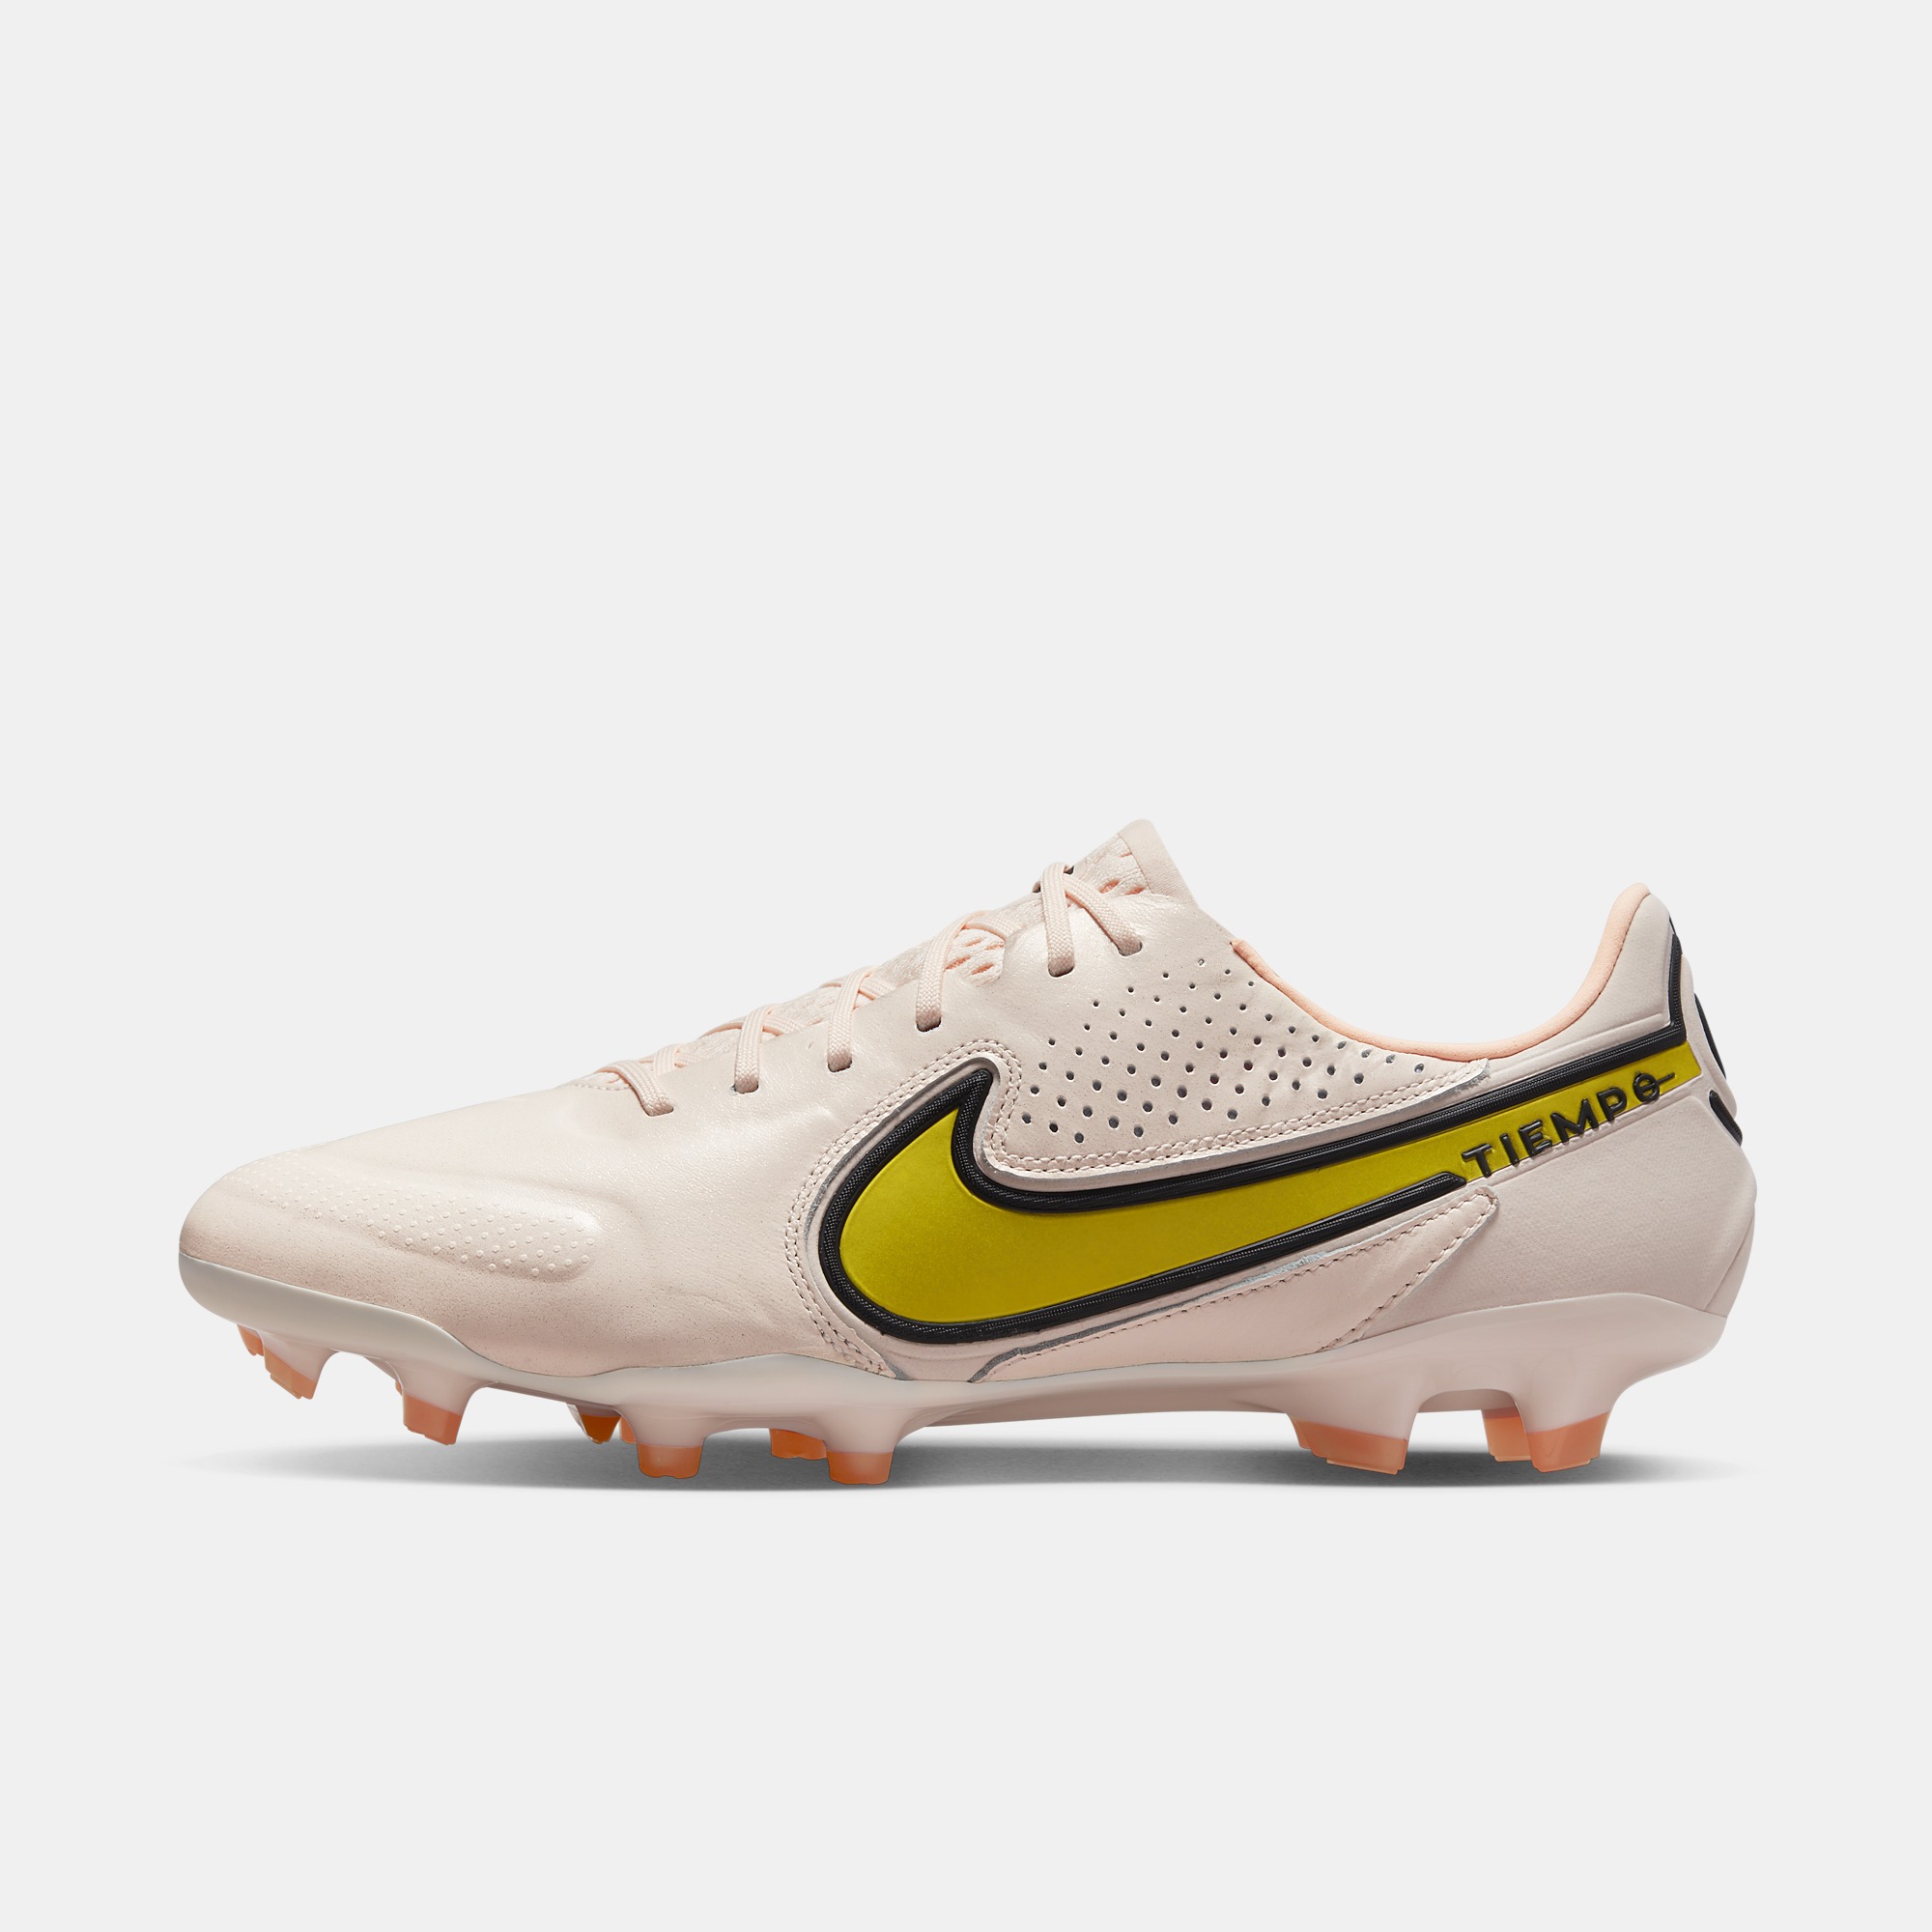 stefanssoccer.com:Nike 9 Elite Firm Ground Soccer Cleats - Ice / Sunset Glow Yellow Strike